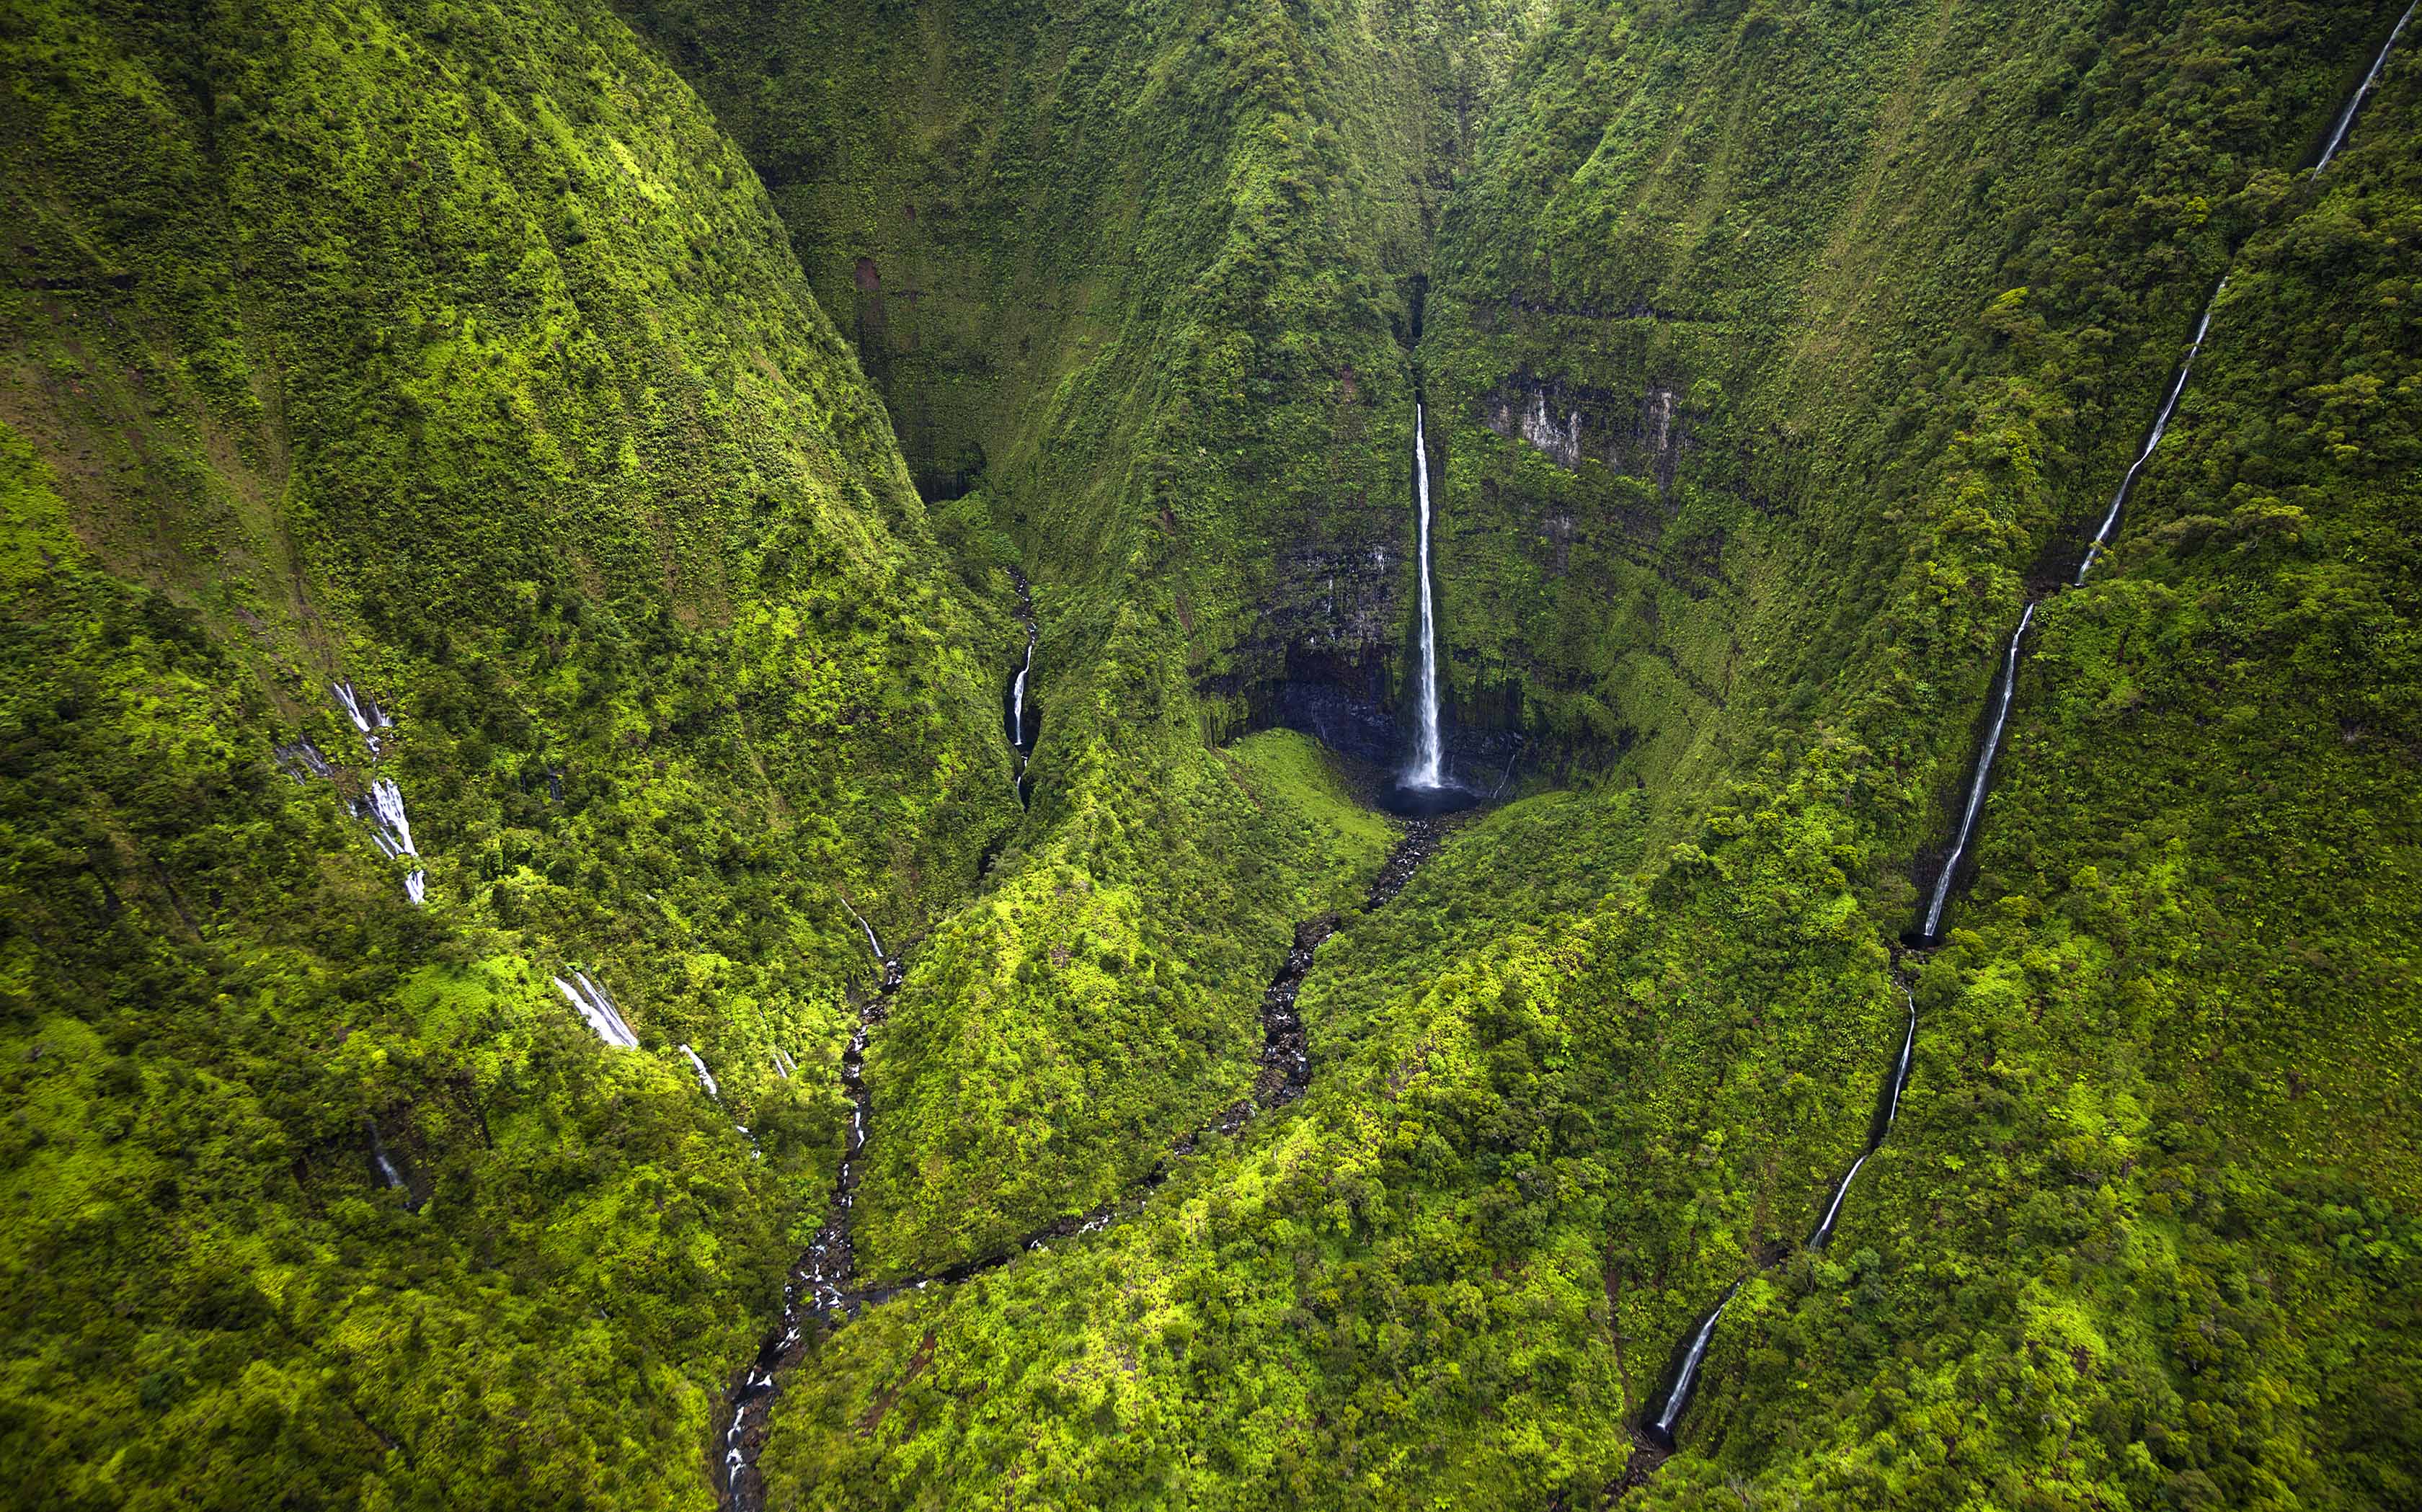 Luscious green vegetation with waterfalls all around